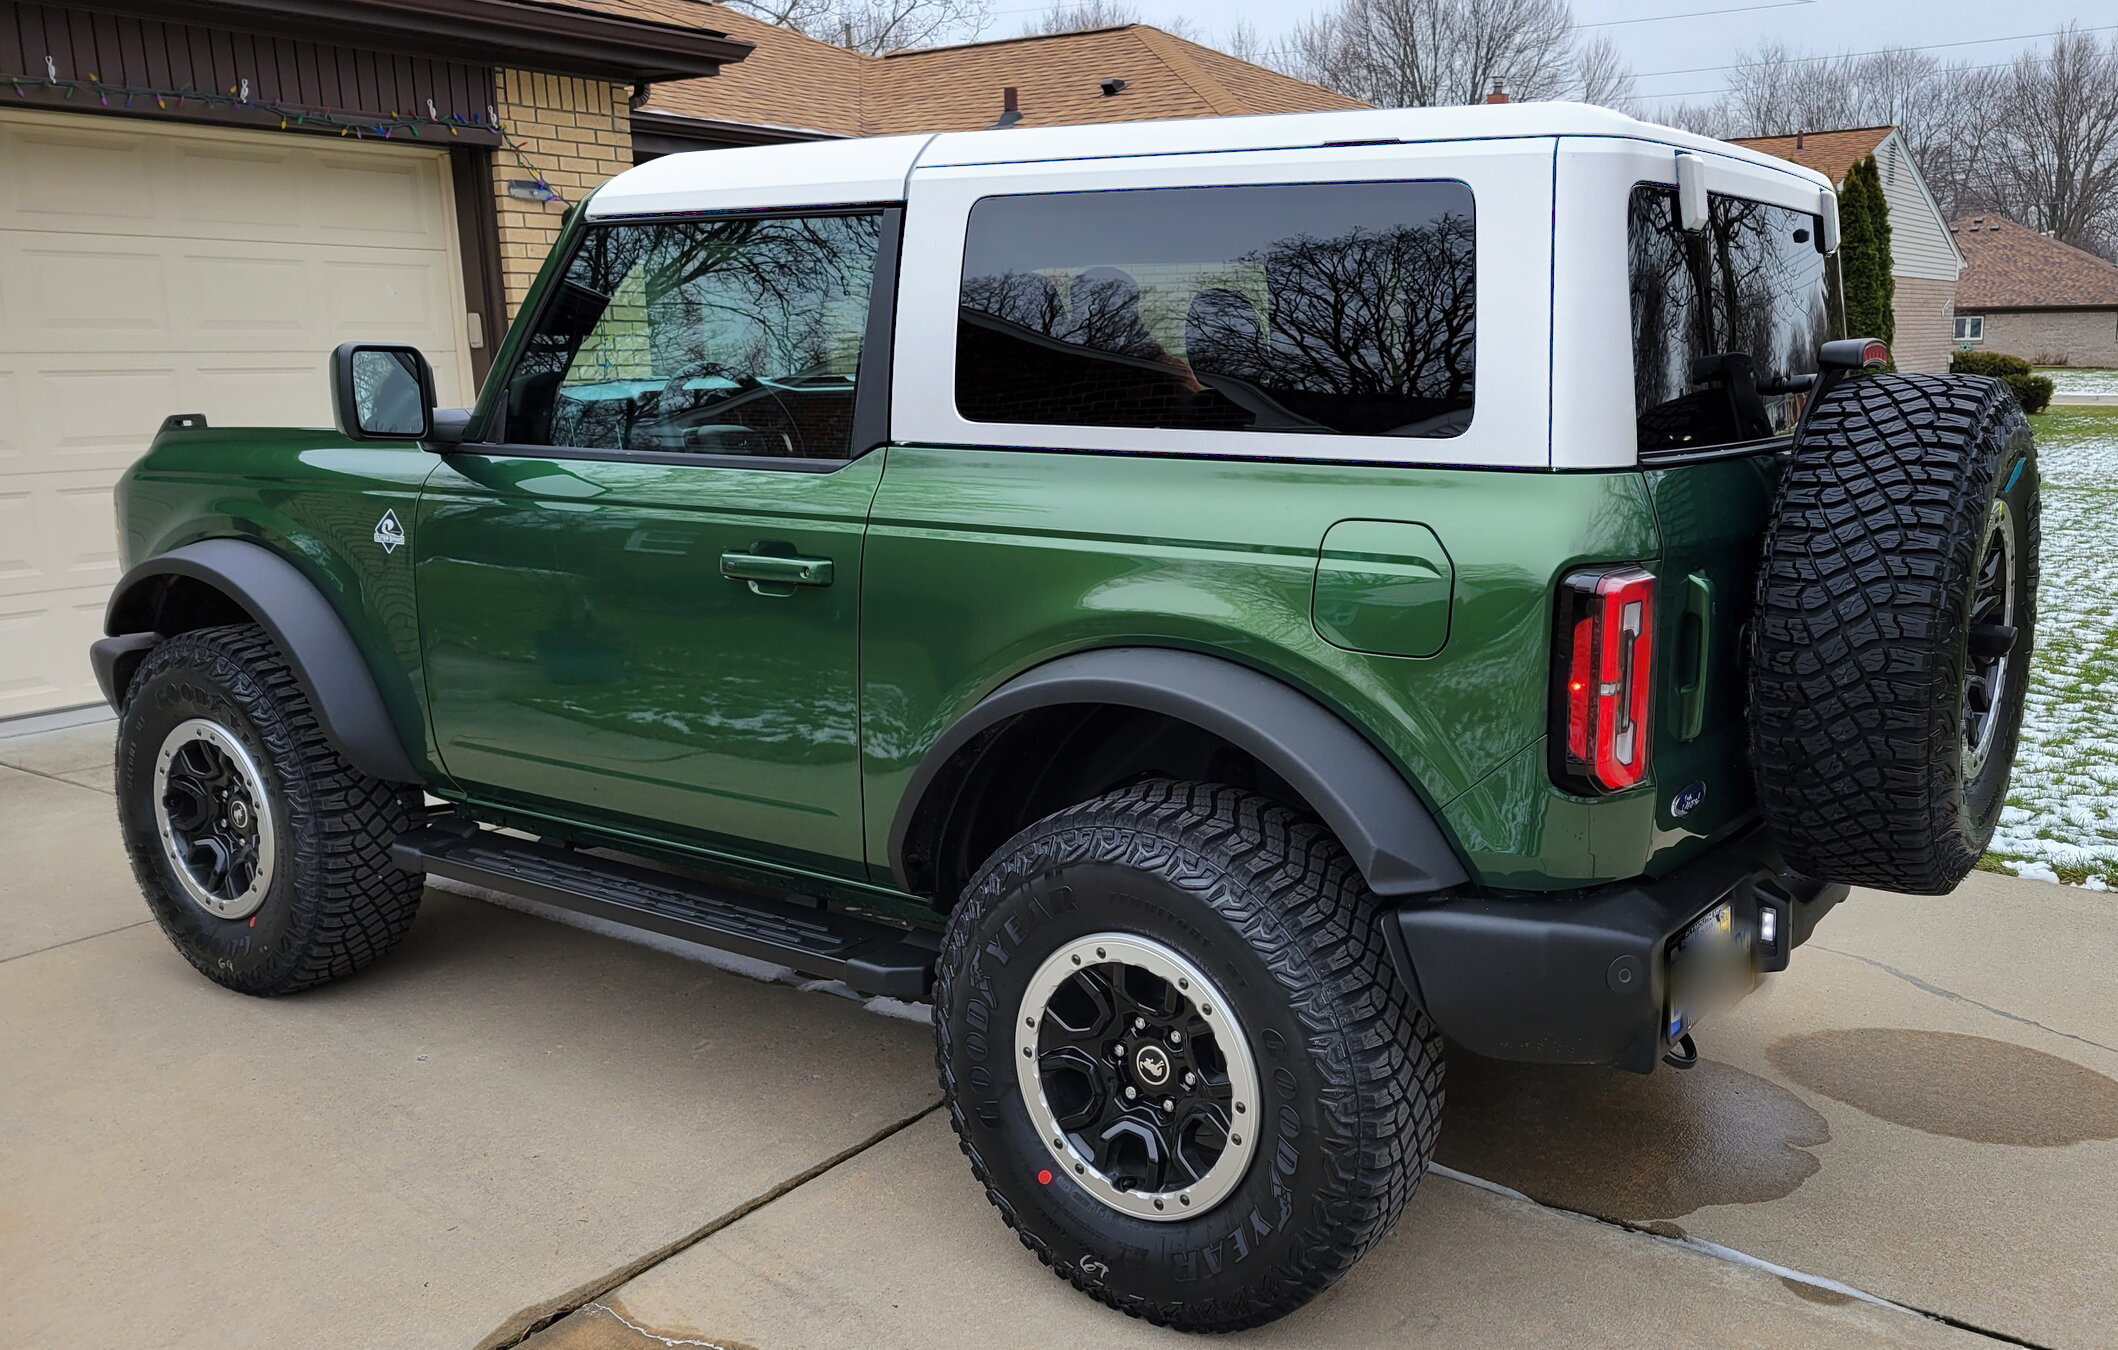 Ford Bronco Eruption Green Bronco 2-Door With White Roof Render Norway Green